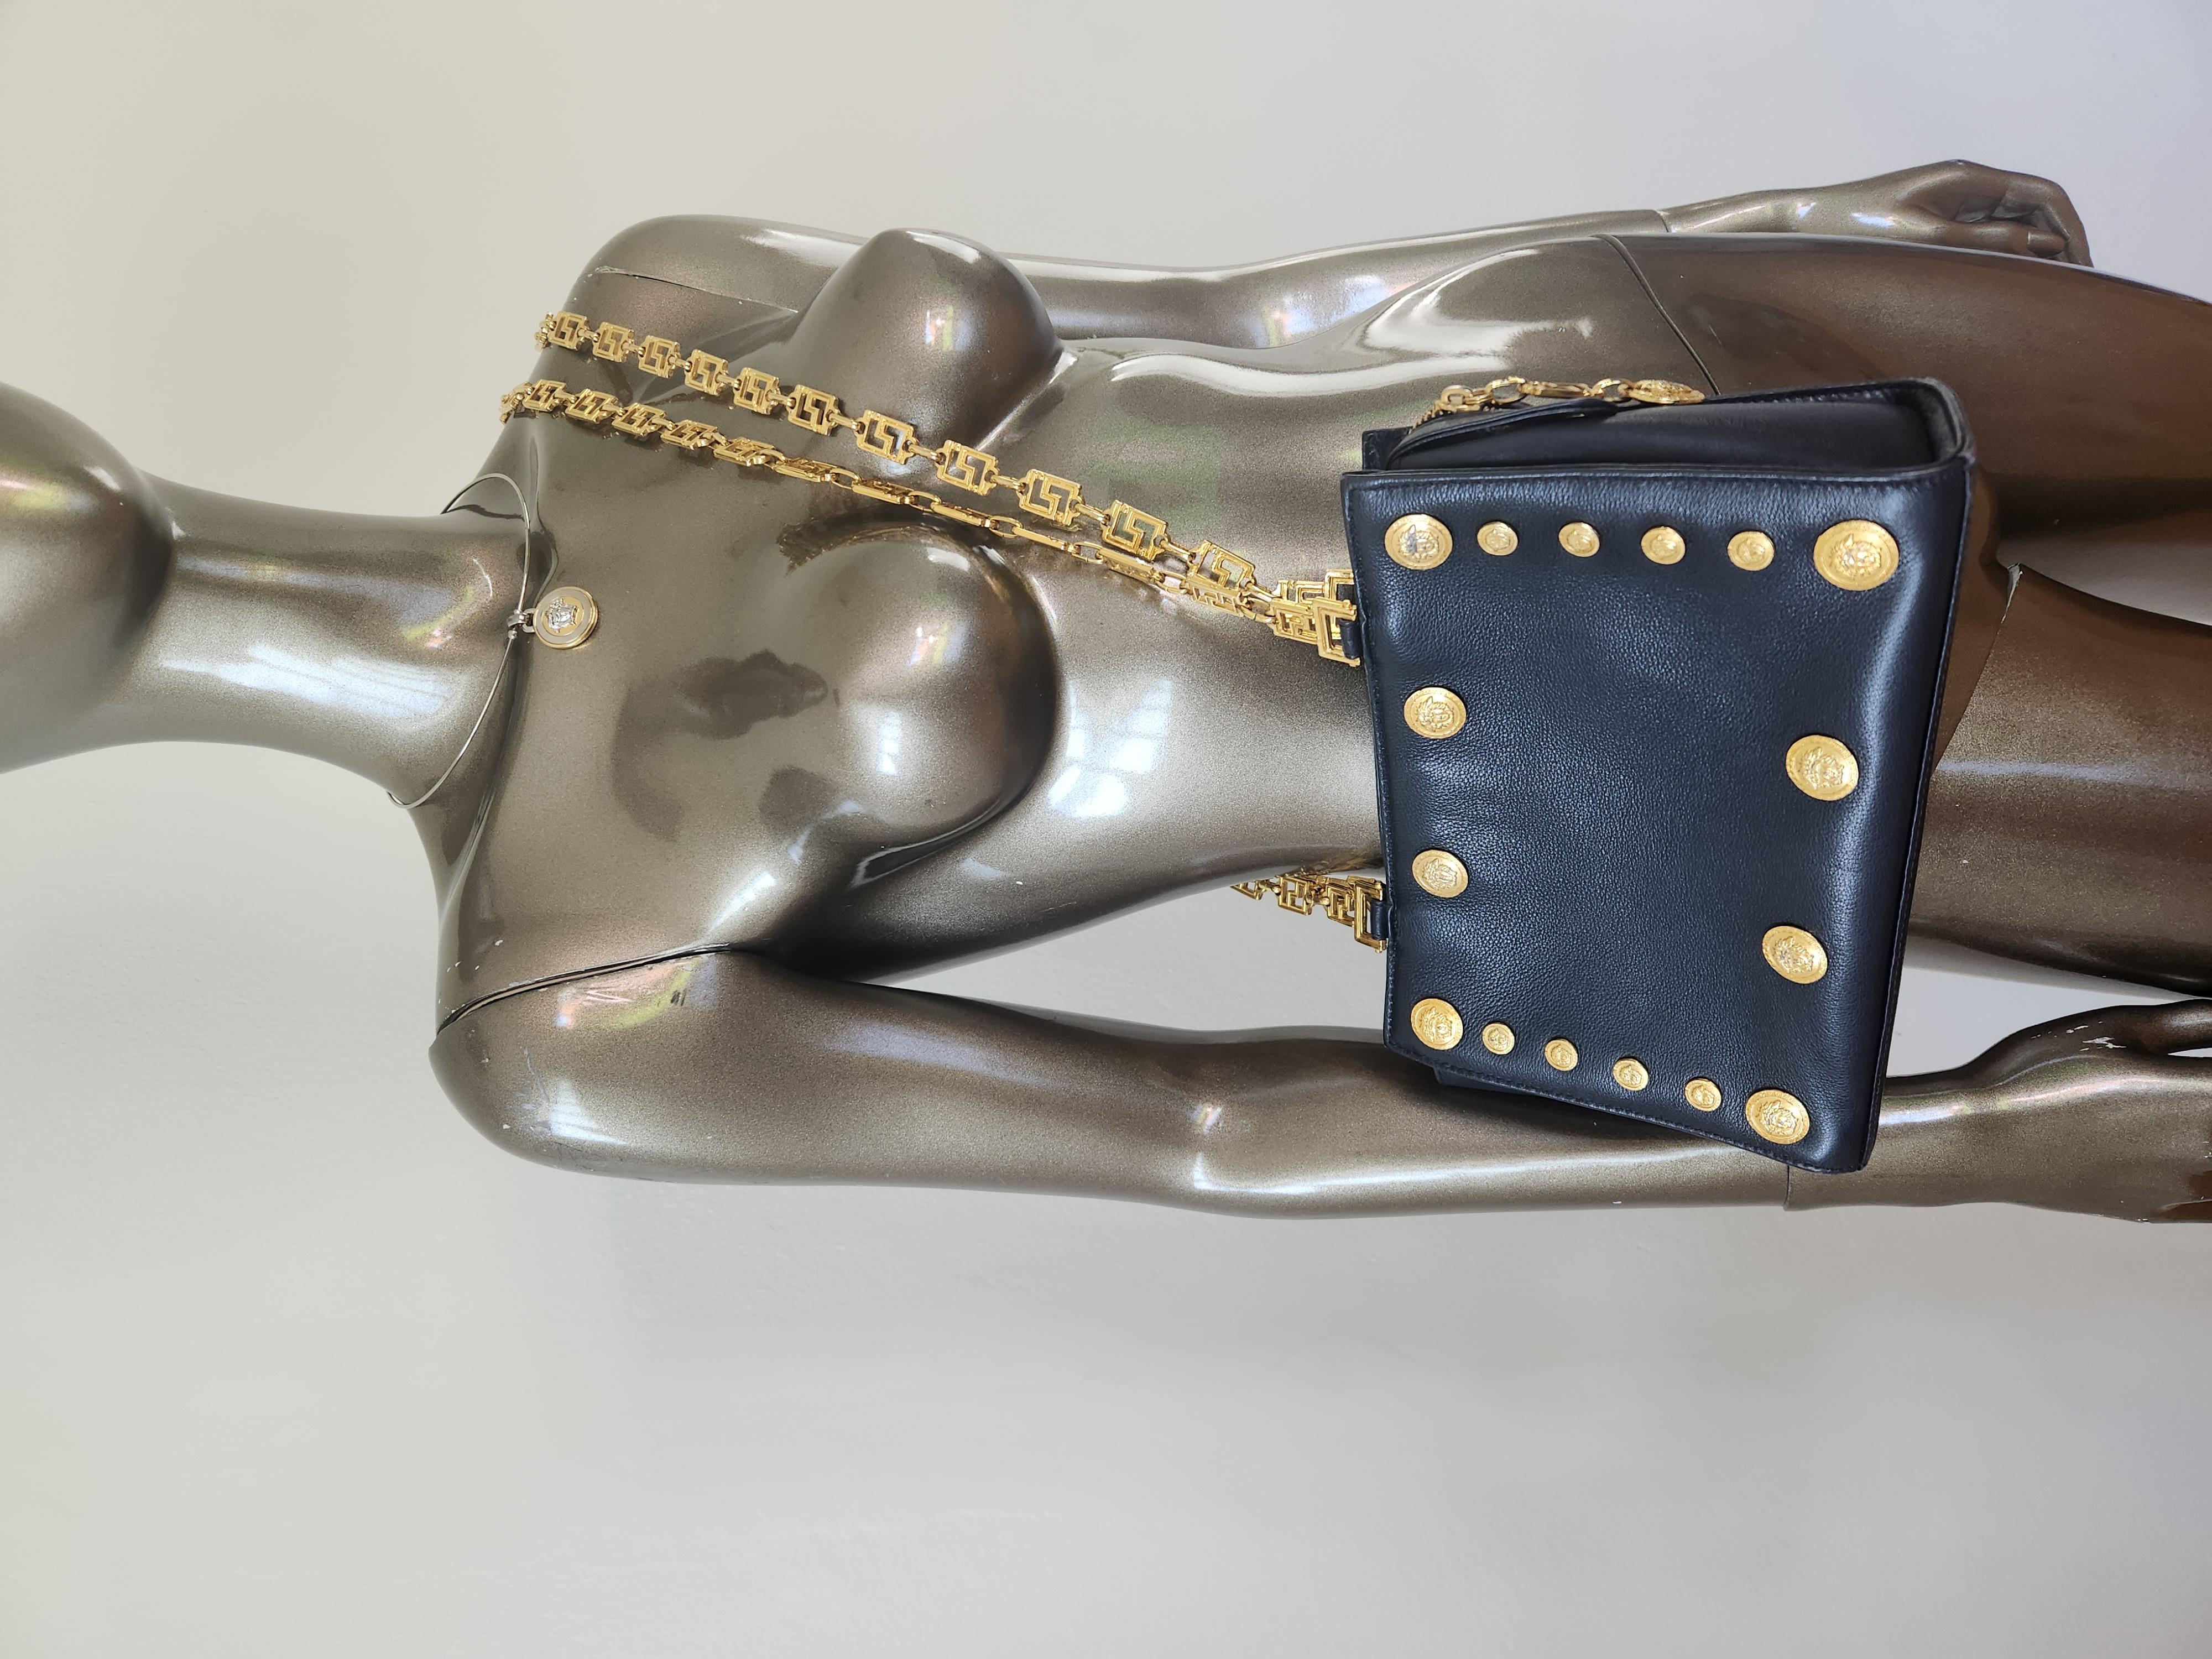 90s Versace signature original greca goddess bag, extremely rare in this size, which is a perfect everyday size to fit your tablets, makeup and etc.

Feature
Colour: Black with Gold Hardware
Material: Leather
Condition: Good,some discolouration on